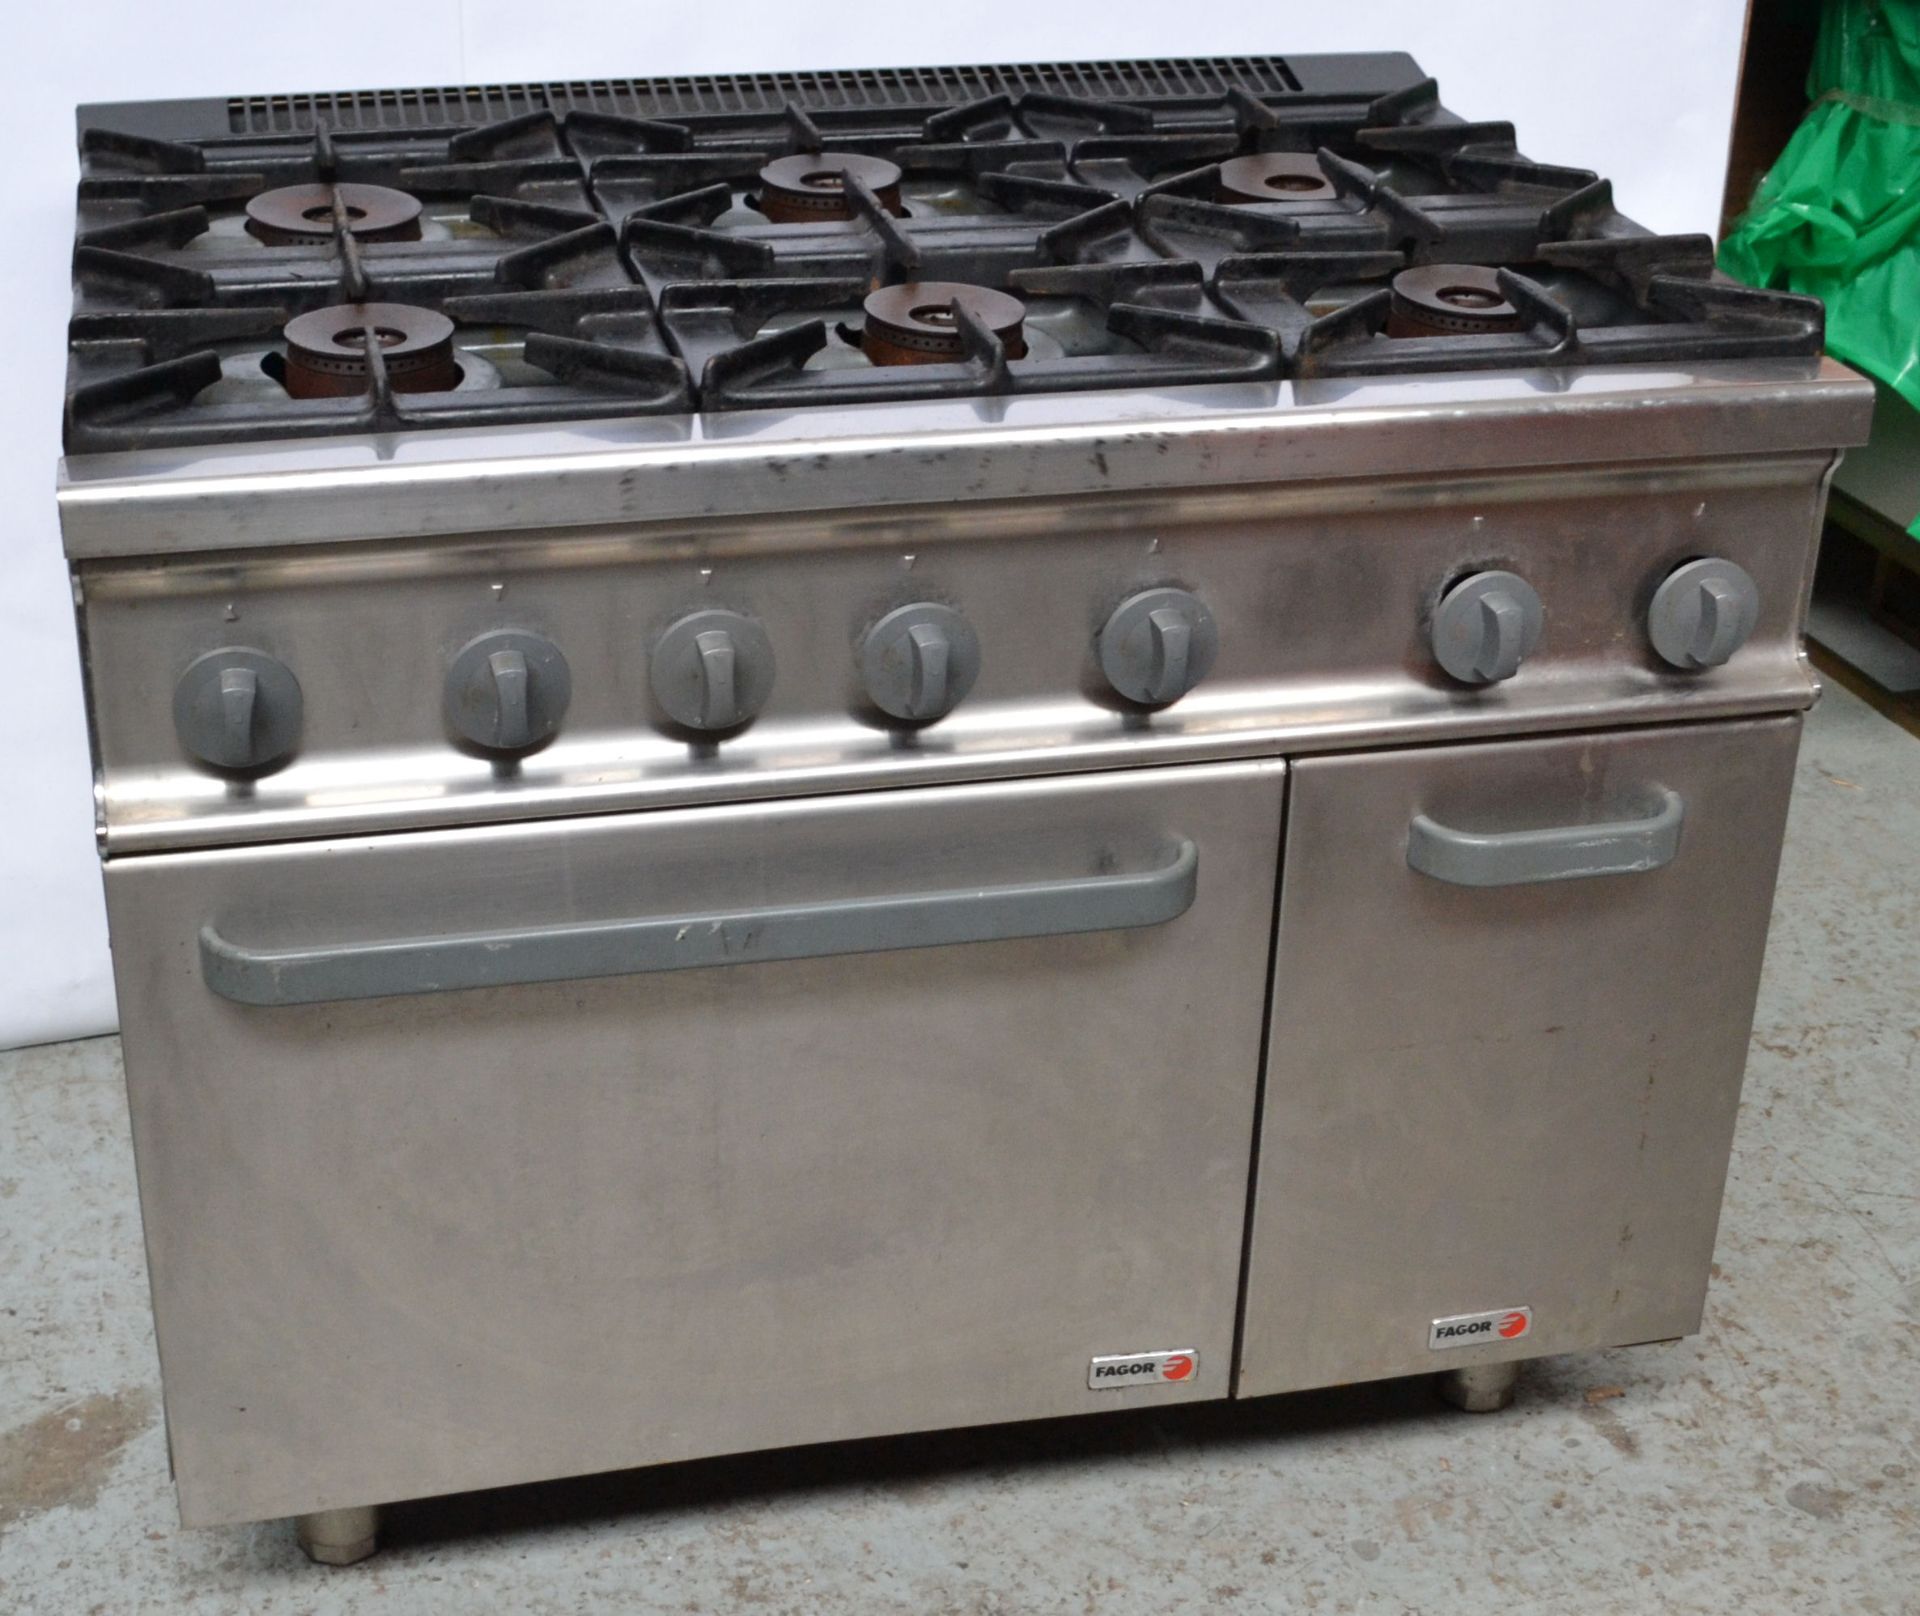 1 x Fagor Six Burner Gas Oven Range (CG-761 BR SM) - Ref NCE011 - CL178 - Location: Altrincham - Image 3 of 15